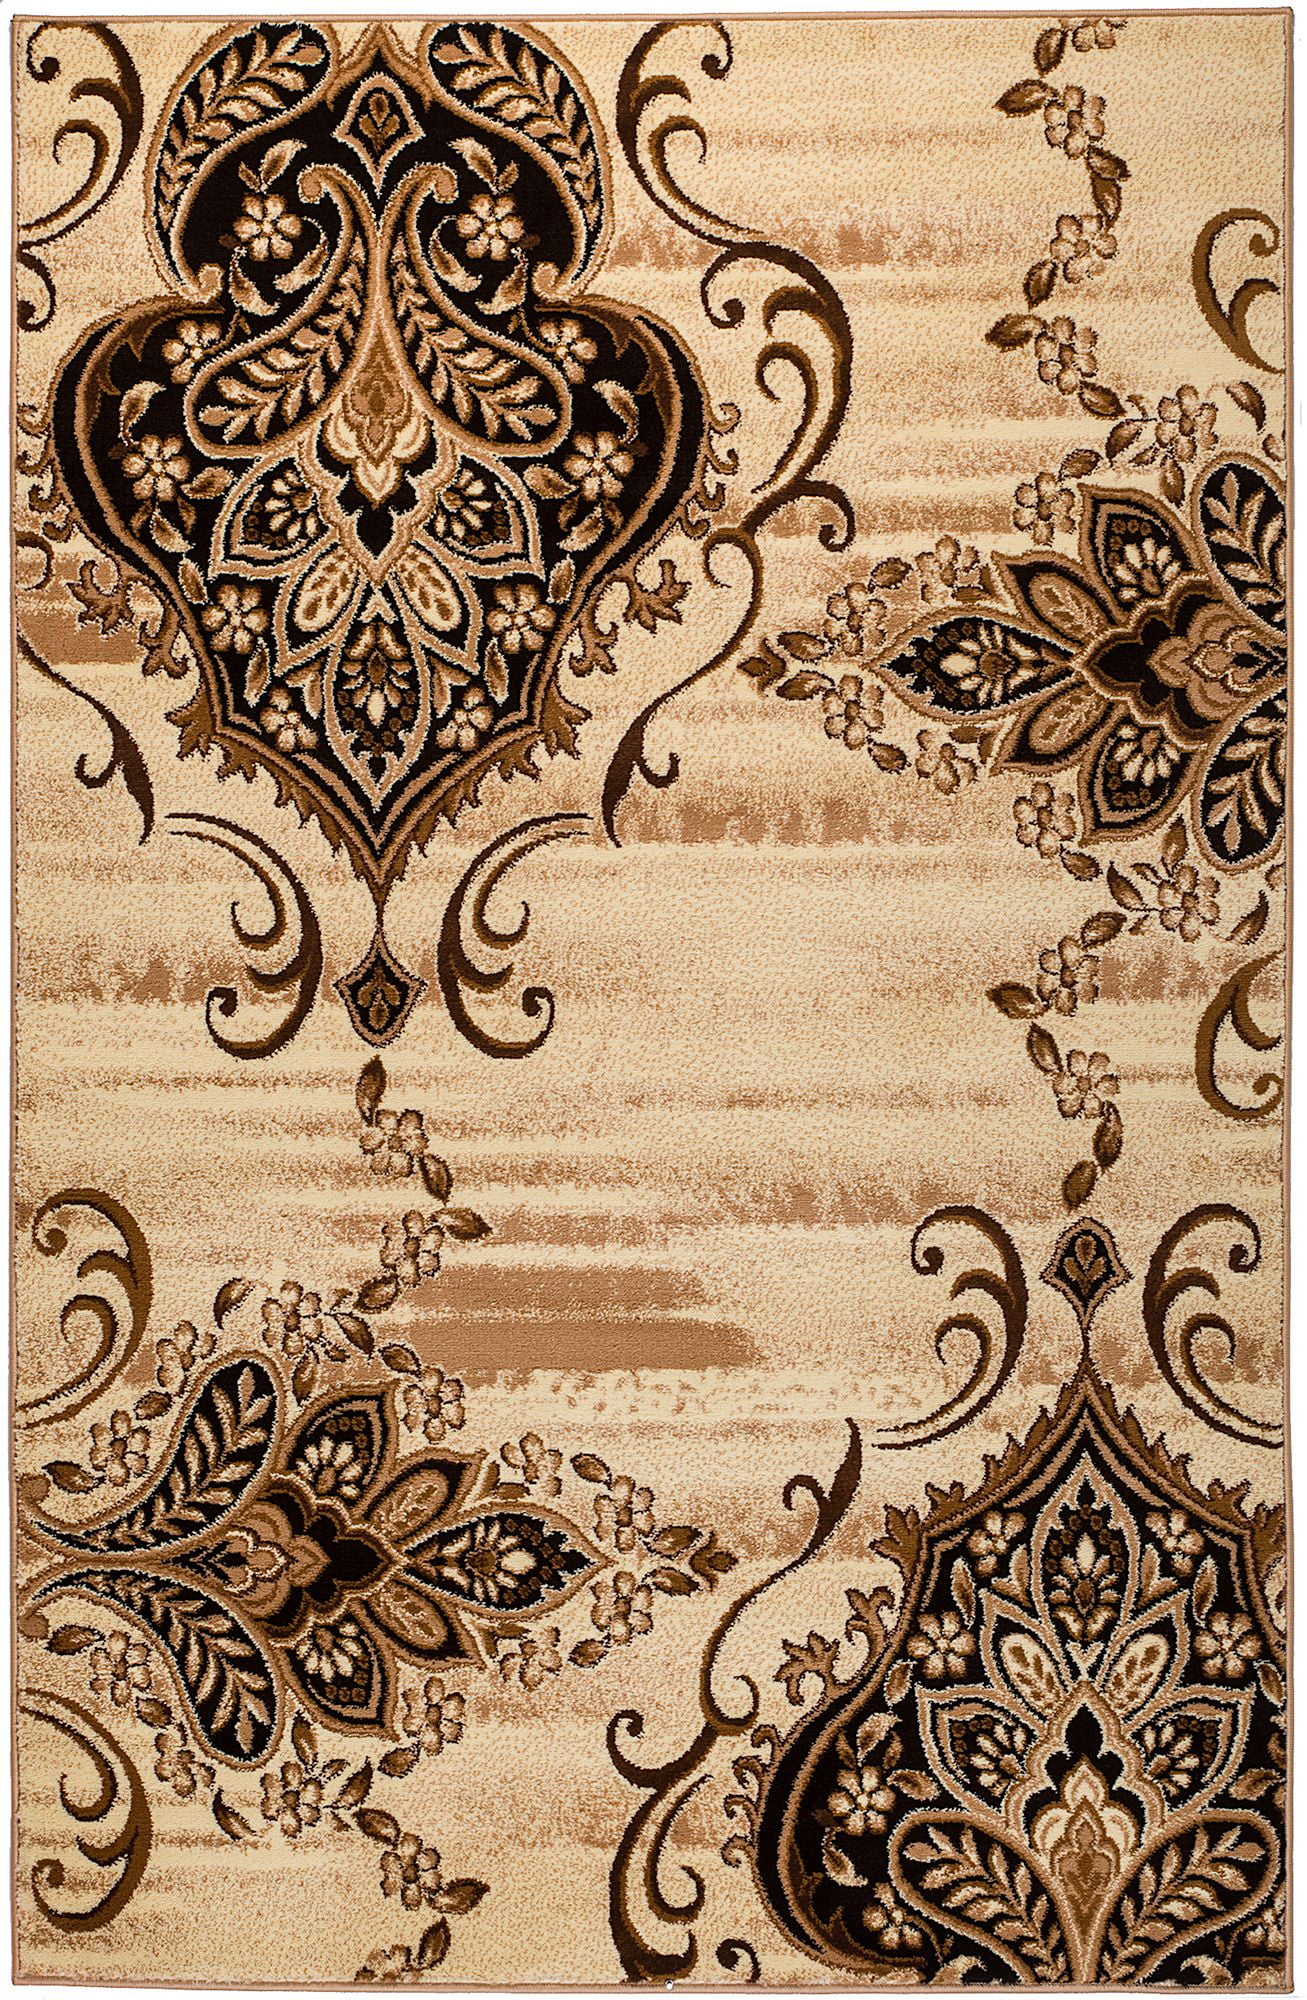 United Weavers 510-21126 Beige Damask Leaves 2x3 Area Rug Approx 1' 10" x 3' 